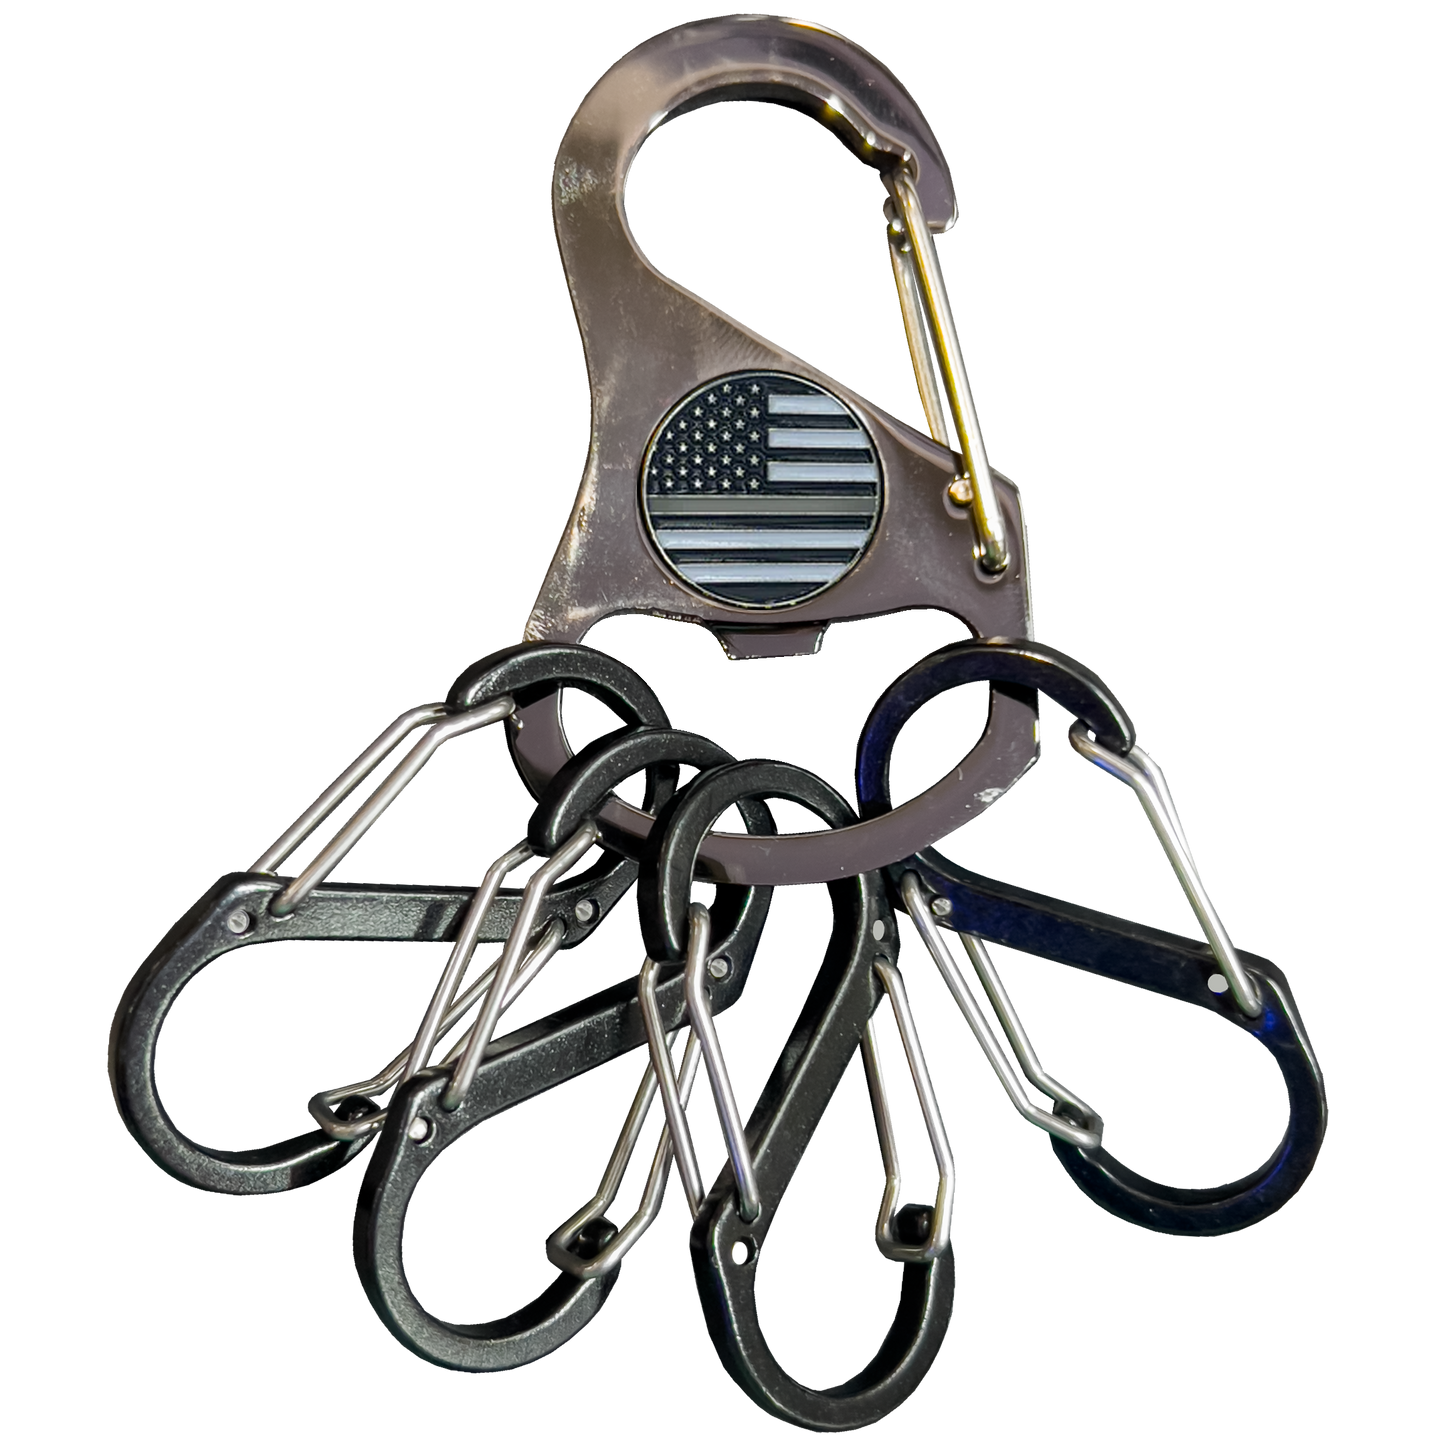 Correctional Officer Thin Gray Line Carabiner Keychain with 4 carabiner clips and bottle opener function CO Corrections